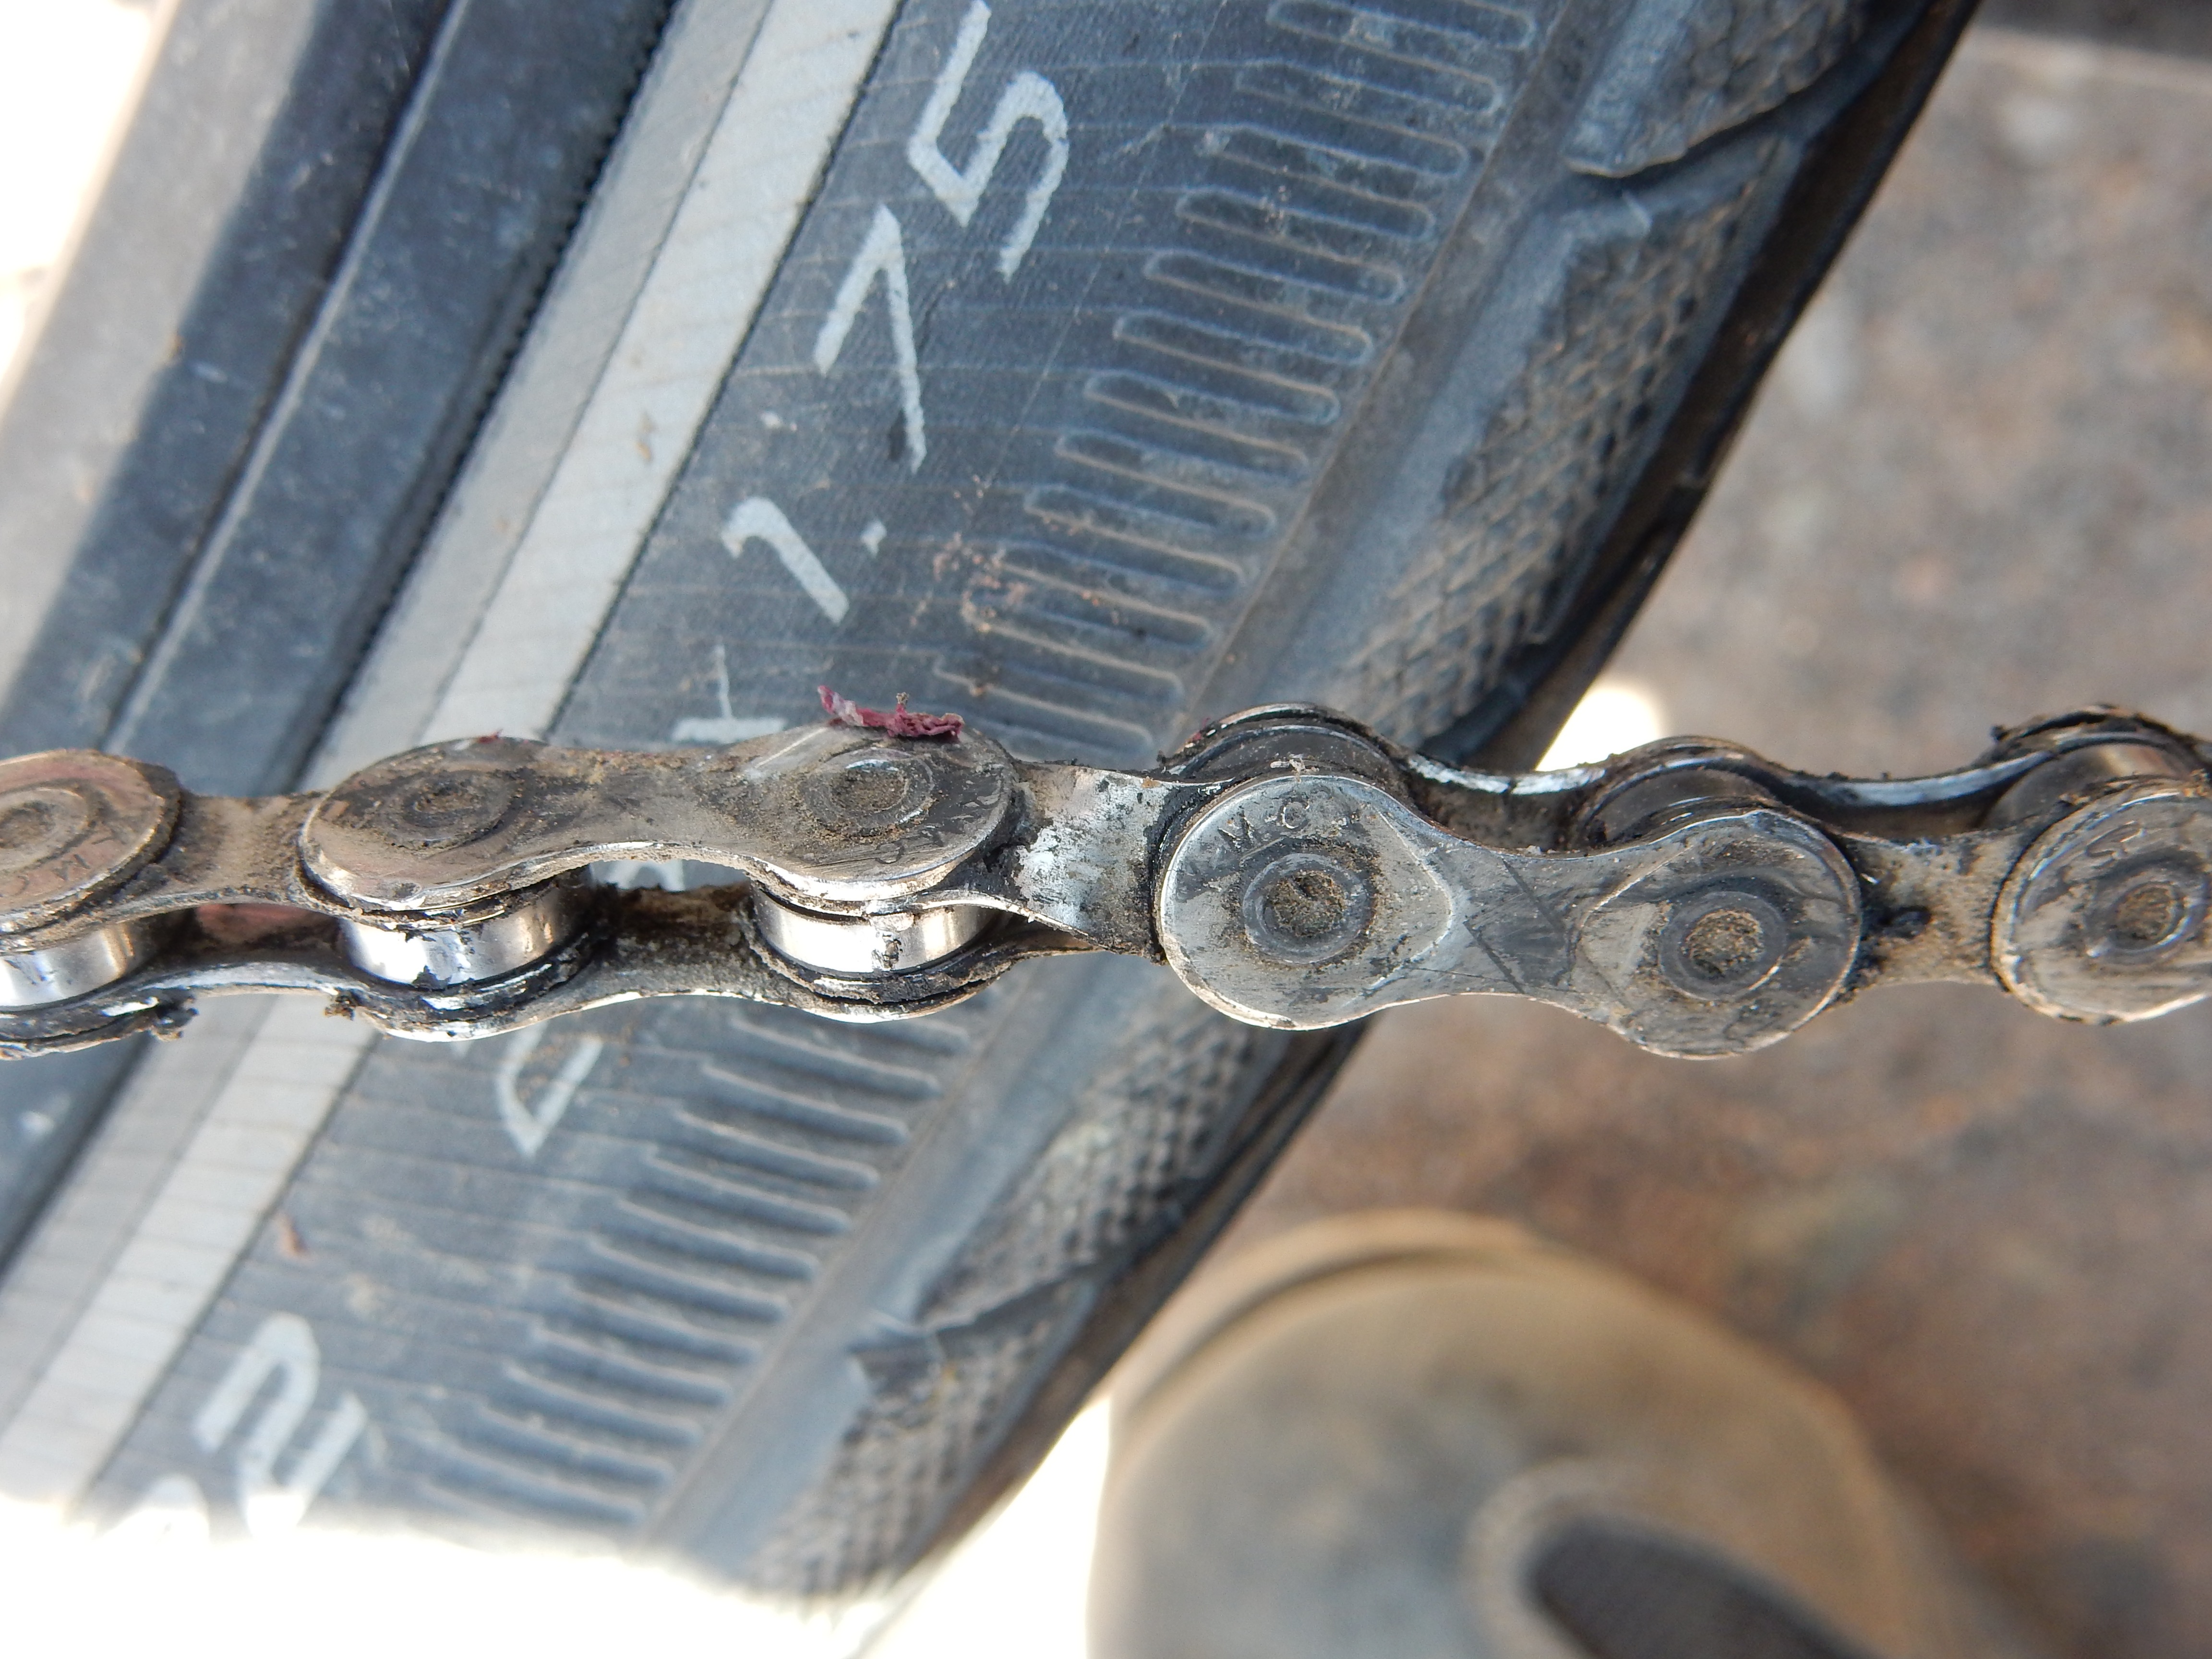 Chain issues